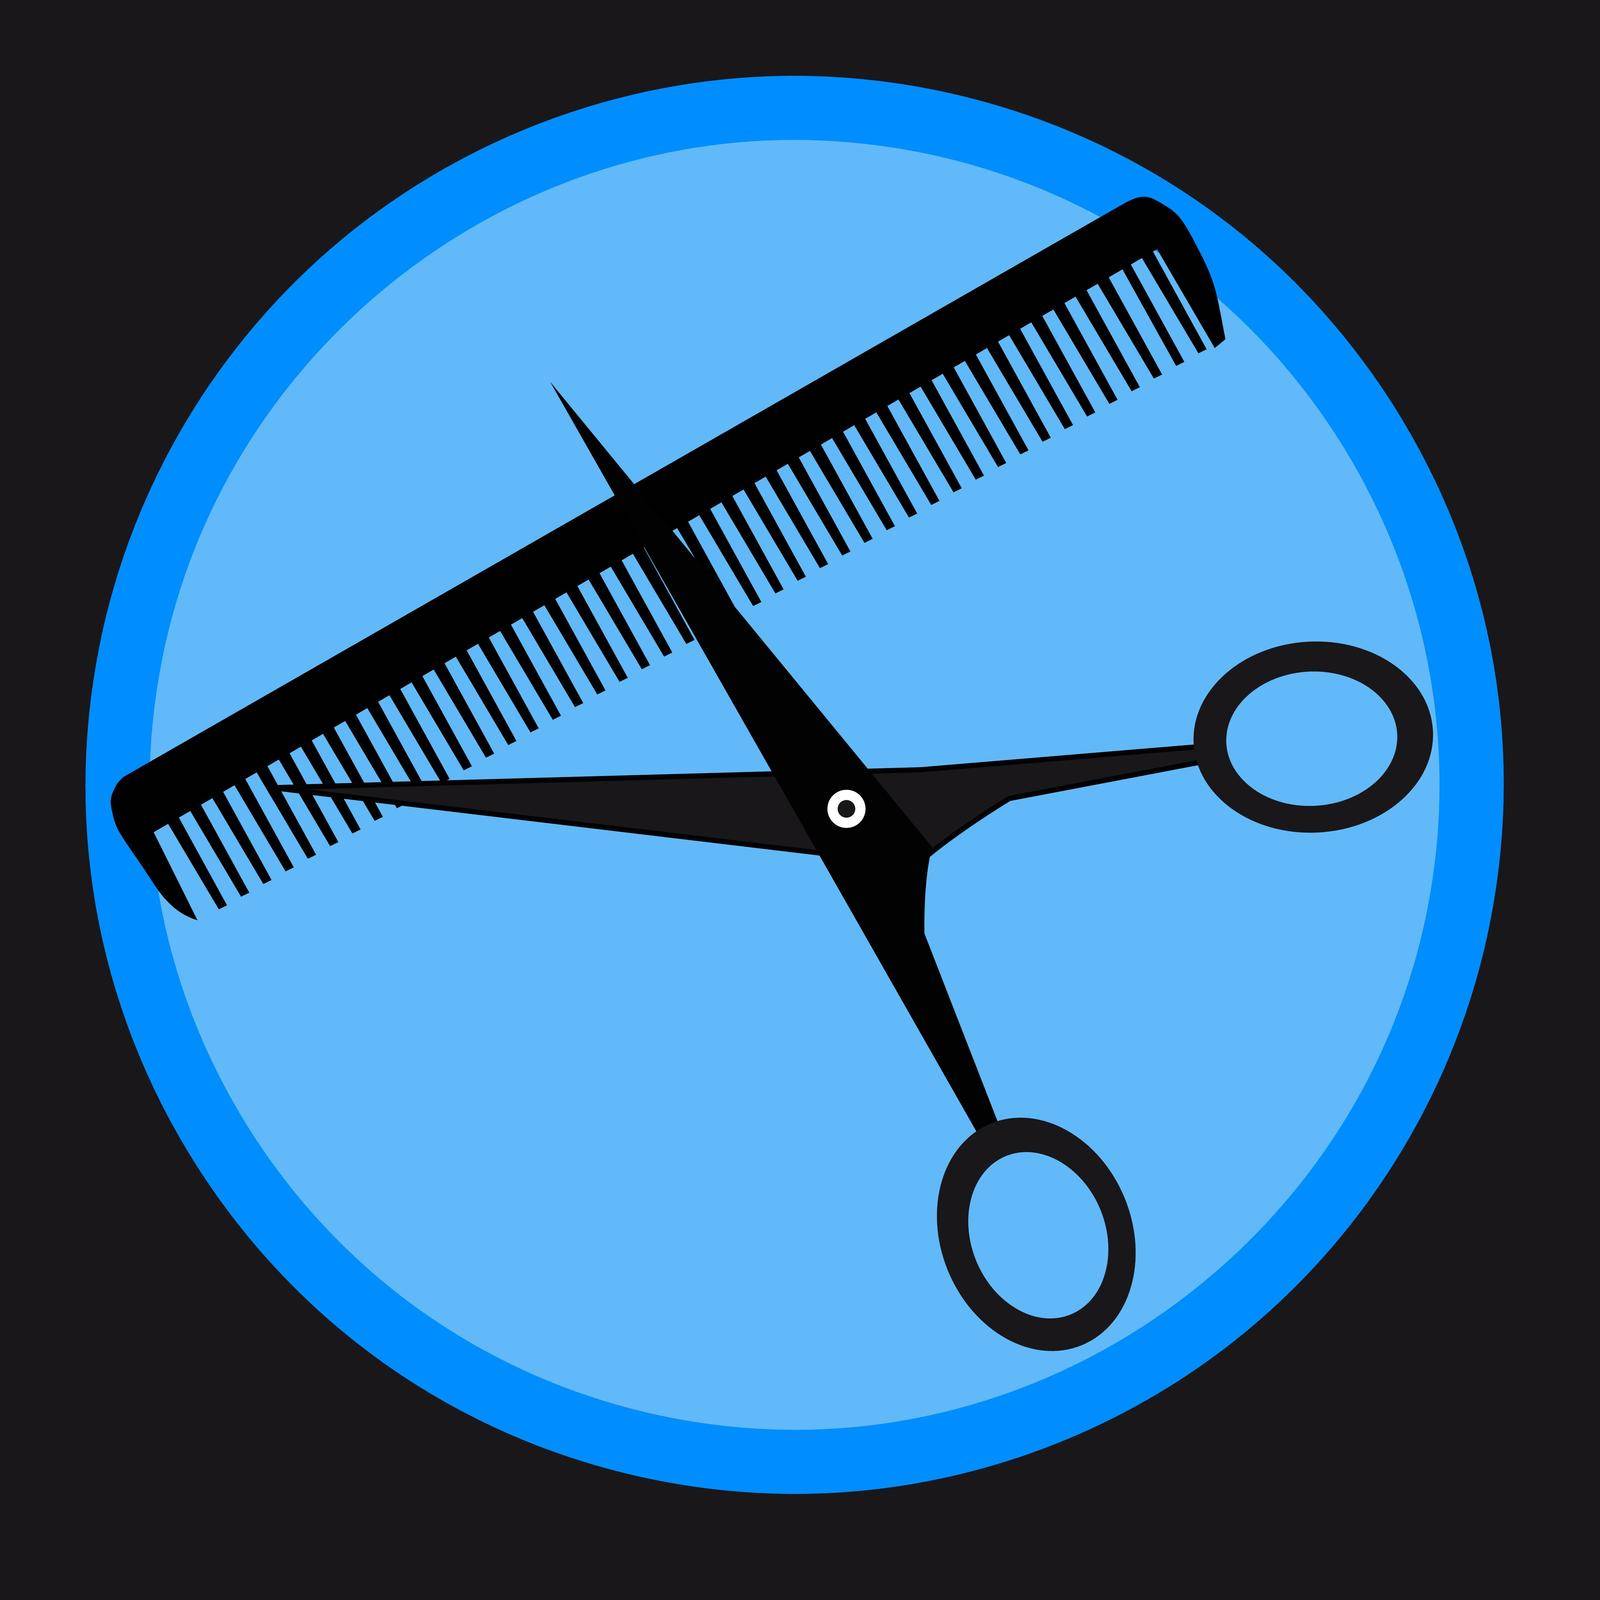 Barber tools - vector illustration by yganko